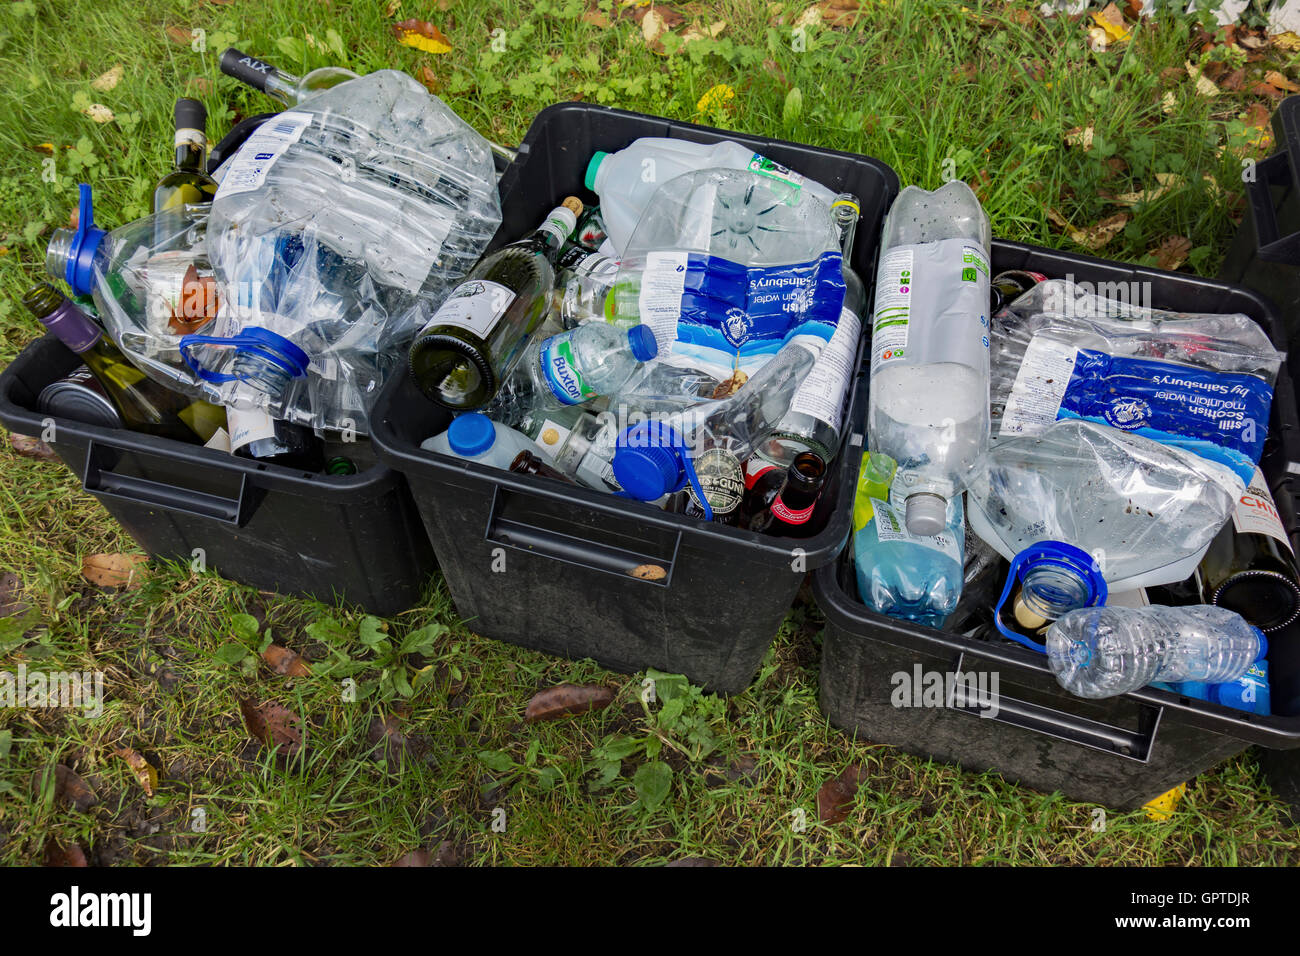 Plastic bottles and glass bottles in waste recycling collection boxes. Stock Photo